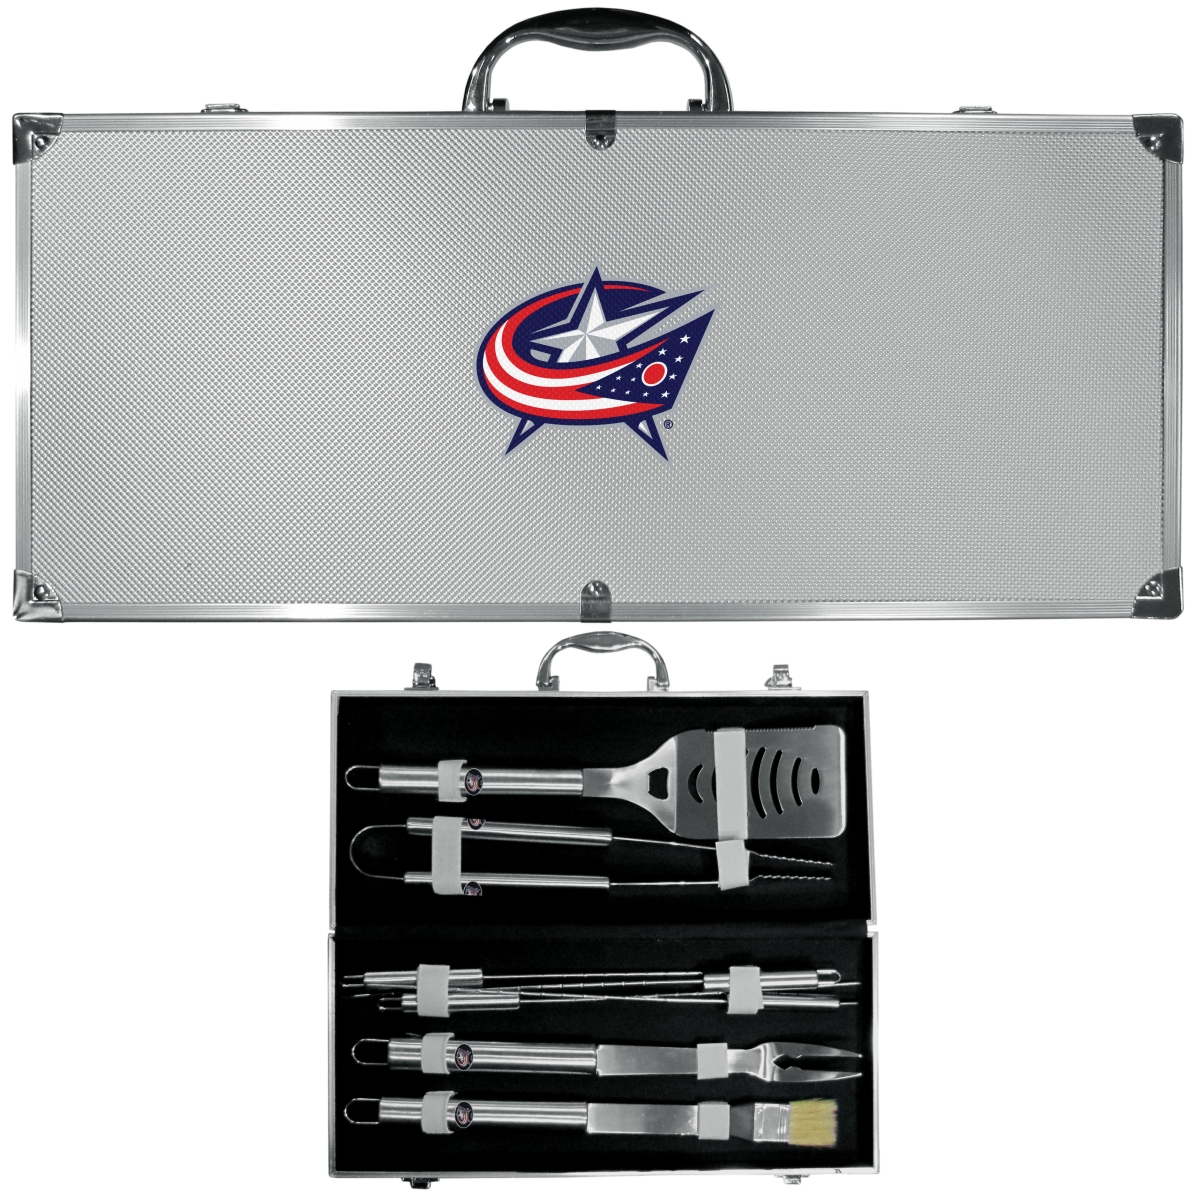 Picture of Siskiyou BBQH130B Unisex NHL Columbus Blue Jackets 8 Piece Stainless Steel BBQ Set with Metal Case